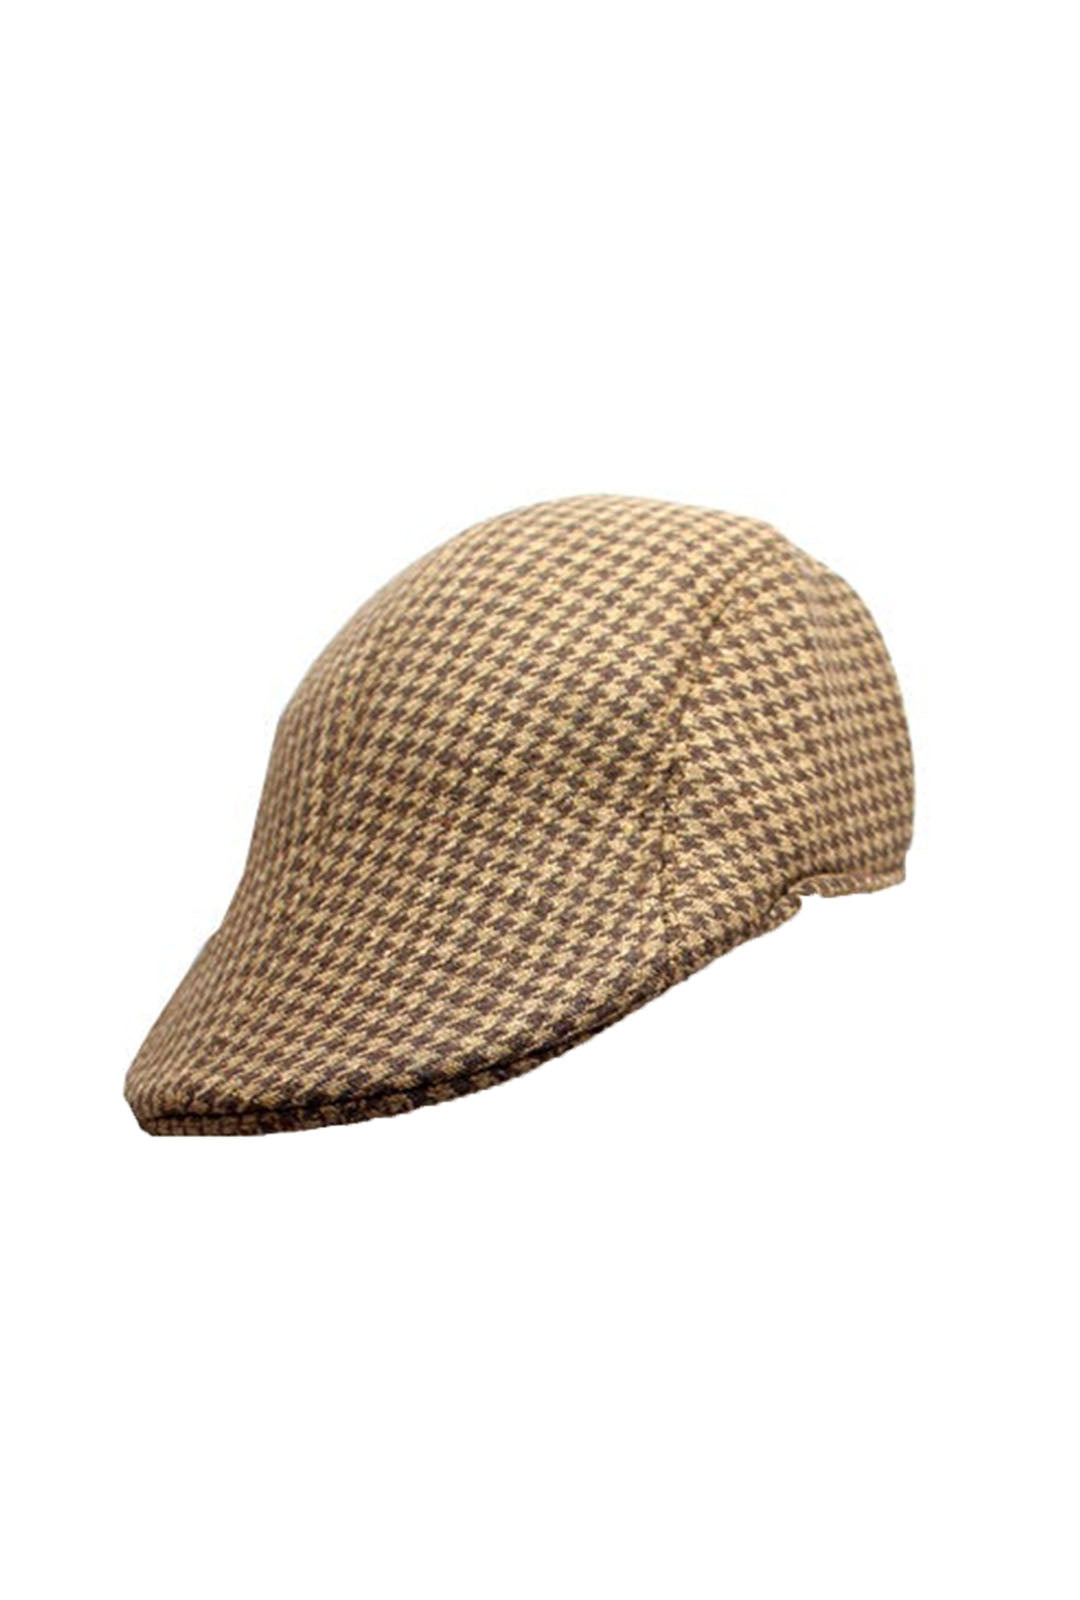 Black and Brown Country Squire Flat Cap